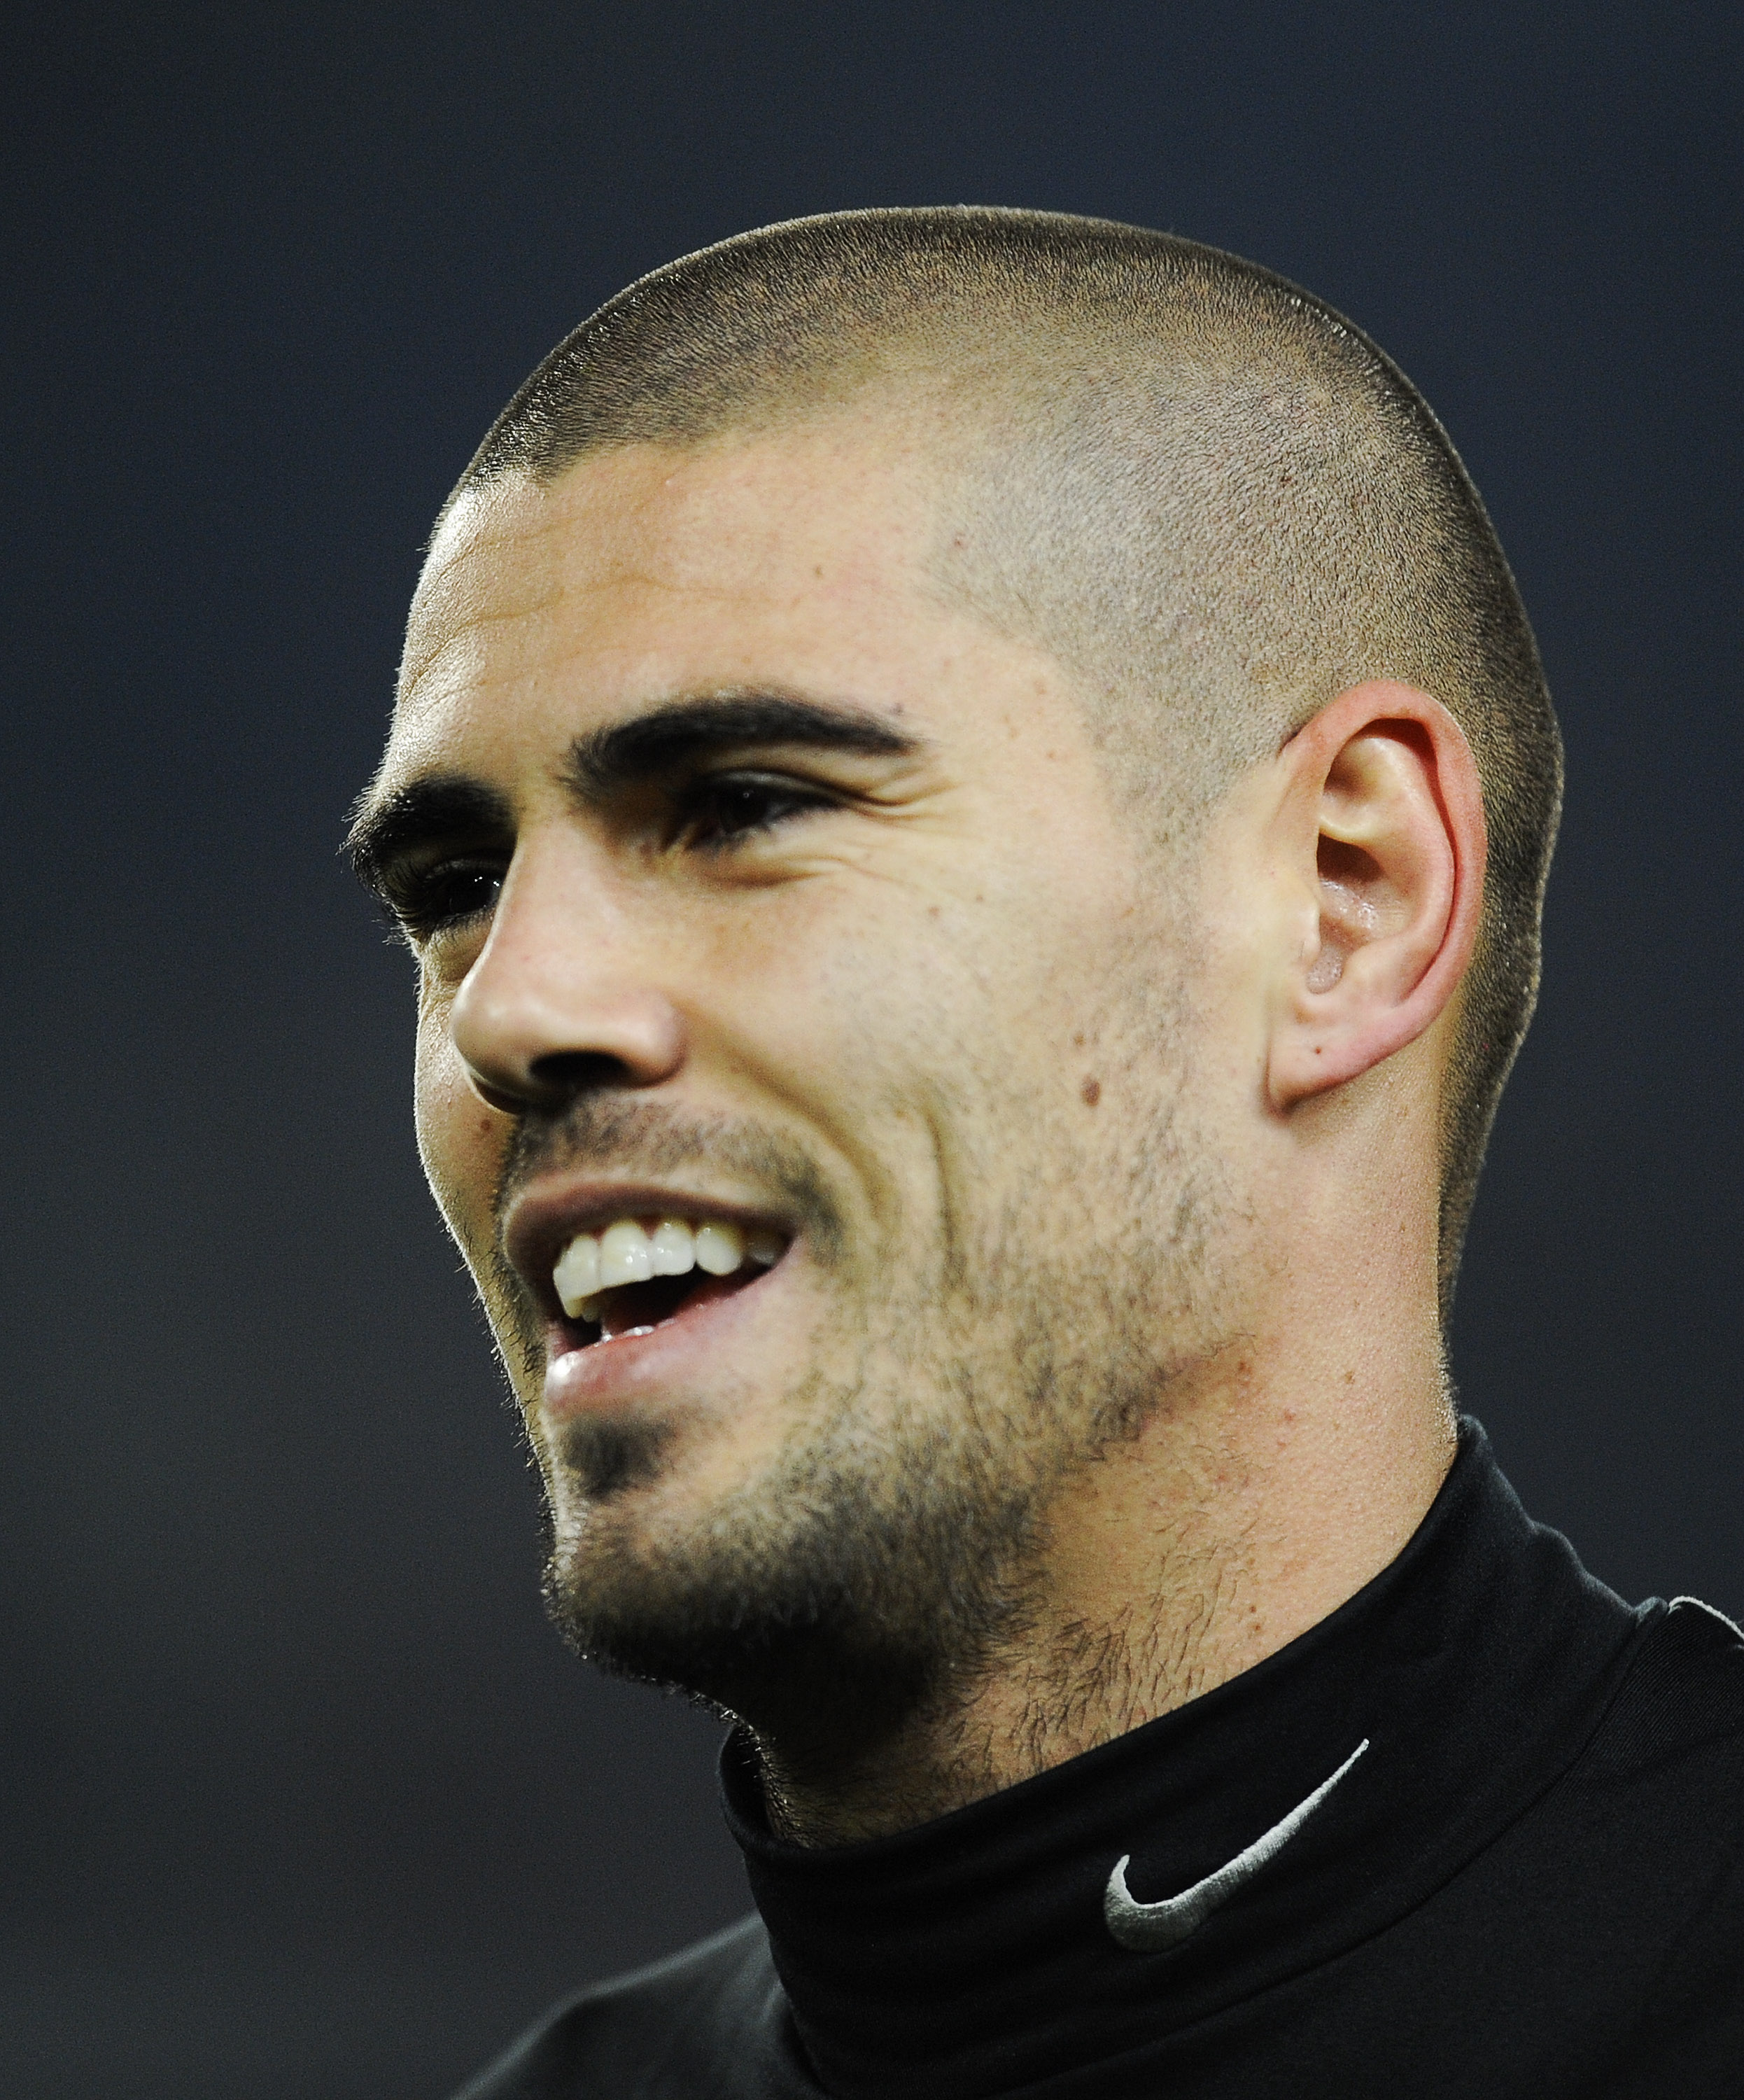 BARCELONA, SPAIN - DECEMBER 12:  Victor Valdes of Barcelona looks on during the warm up prior the La Liga match between Barcelona and Real Sociedad at Camp Nou Stadium on December 12, 2010 in Barcelona, Spain. Barcelona won the match 5-0.  (Photo by David